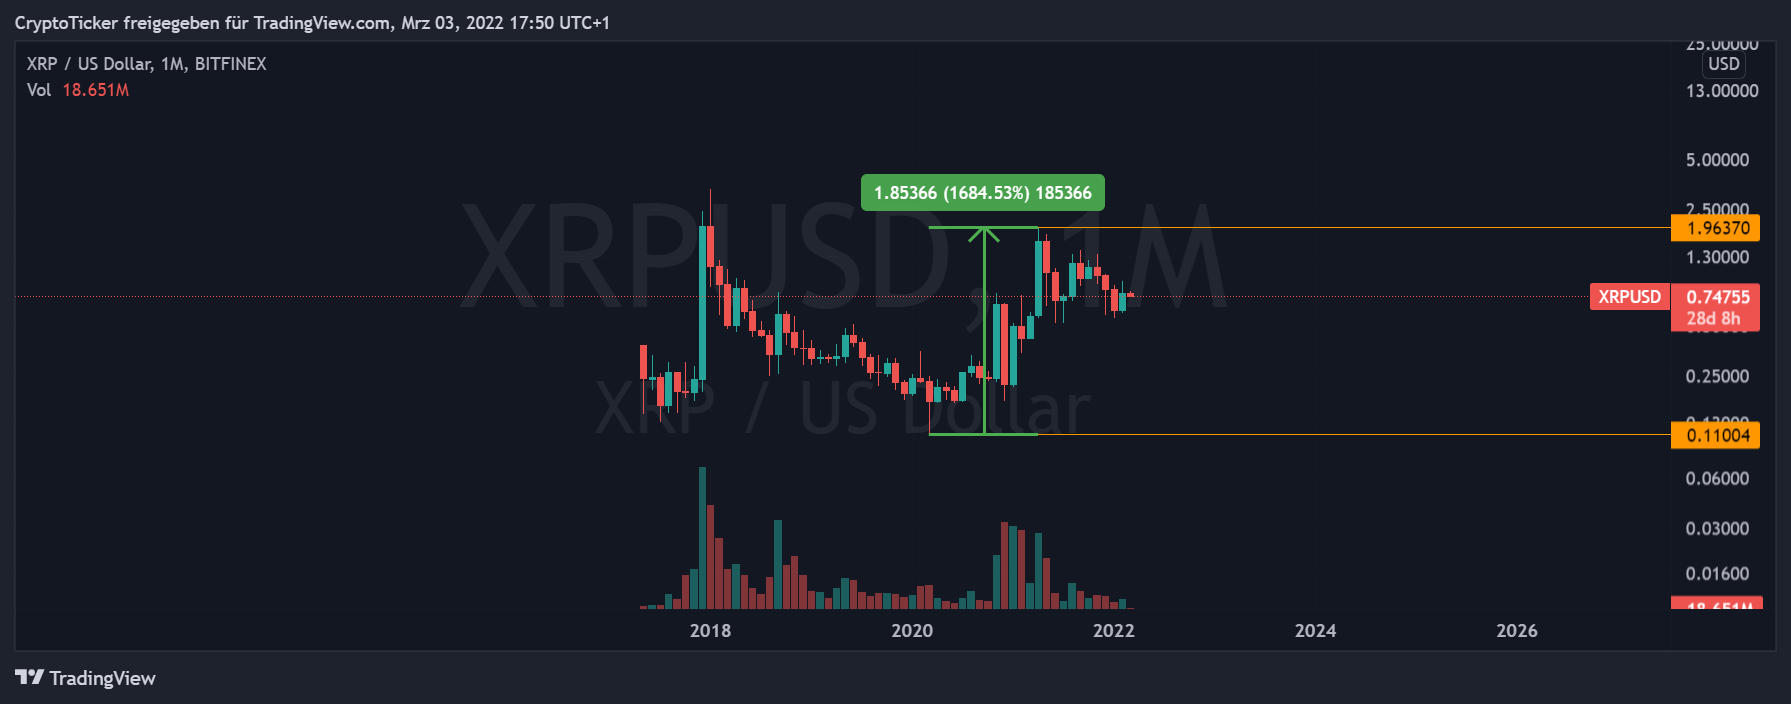 XRP/USD 1-month log chart showing XRP's current price